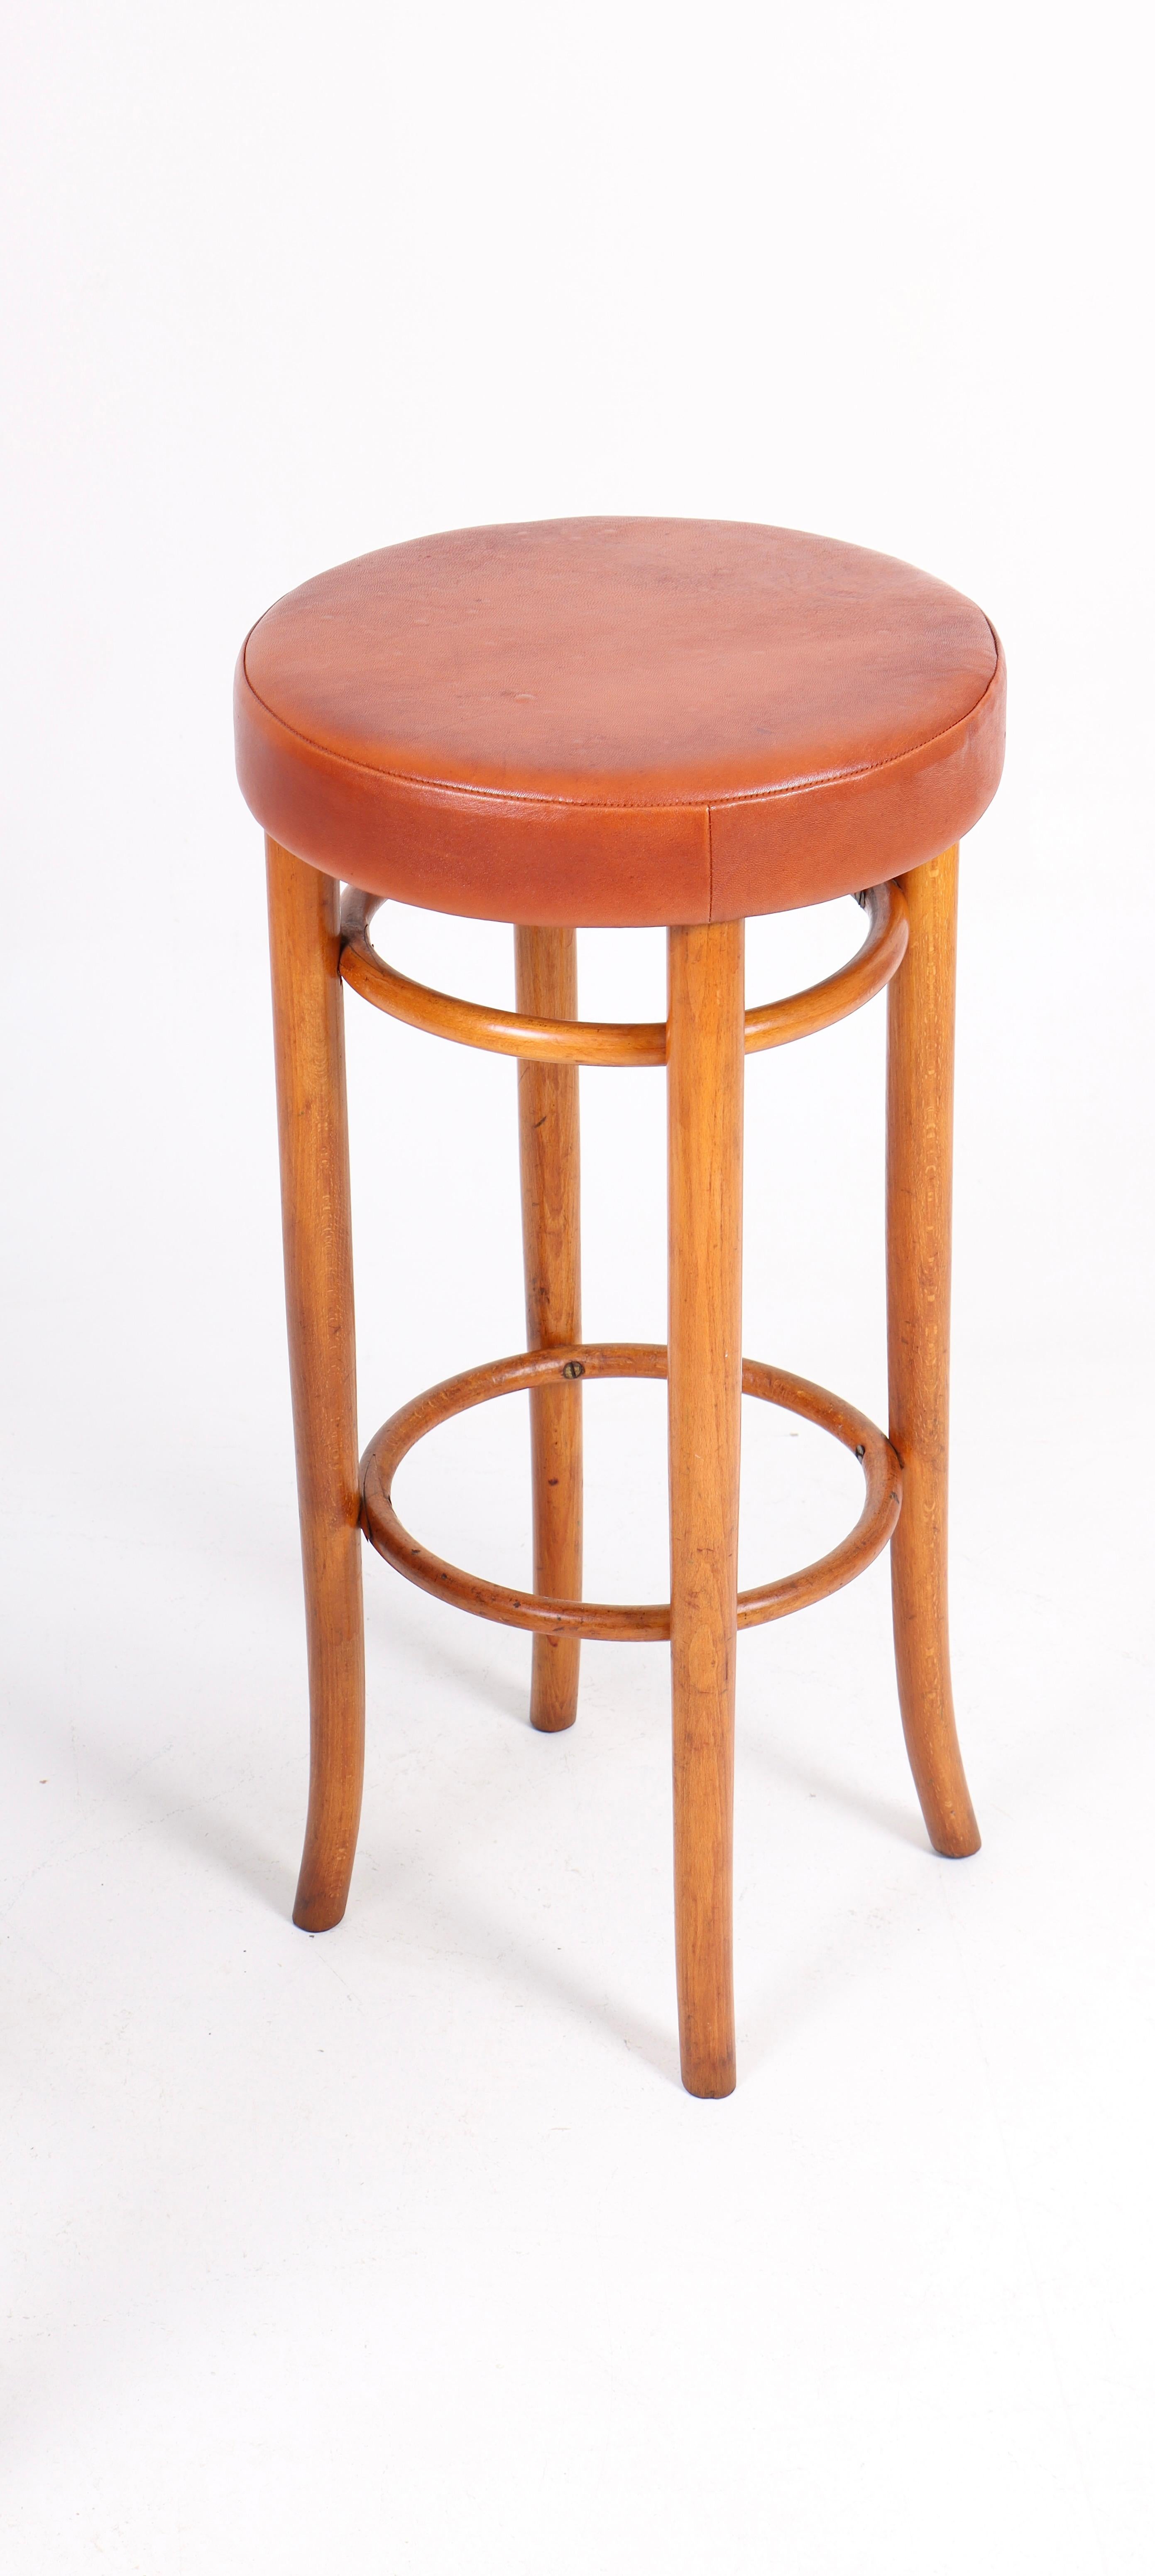 Danish Pair of Bar Stools in Beech and Patinated Leather by Fritz Hansen, 1940s For Sale